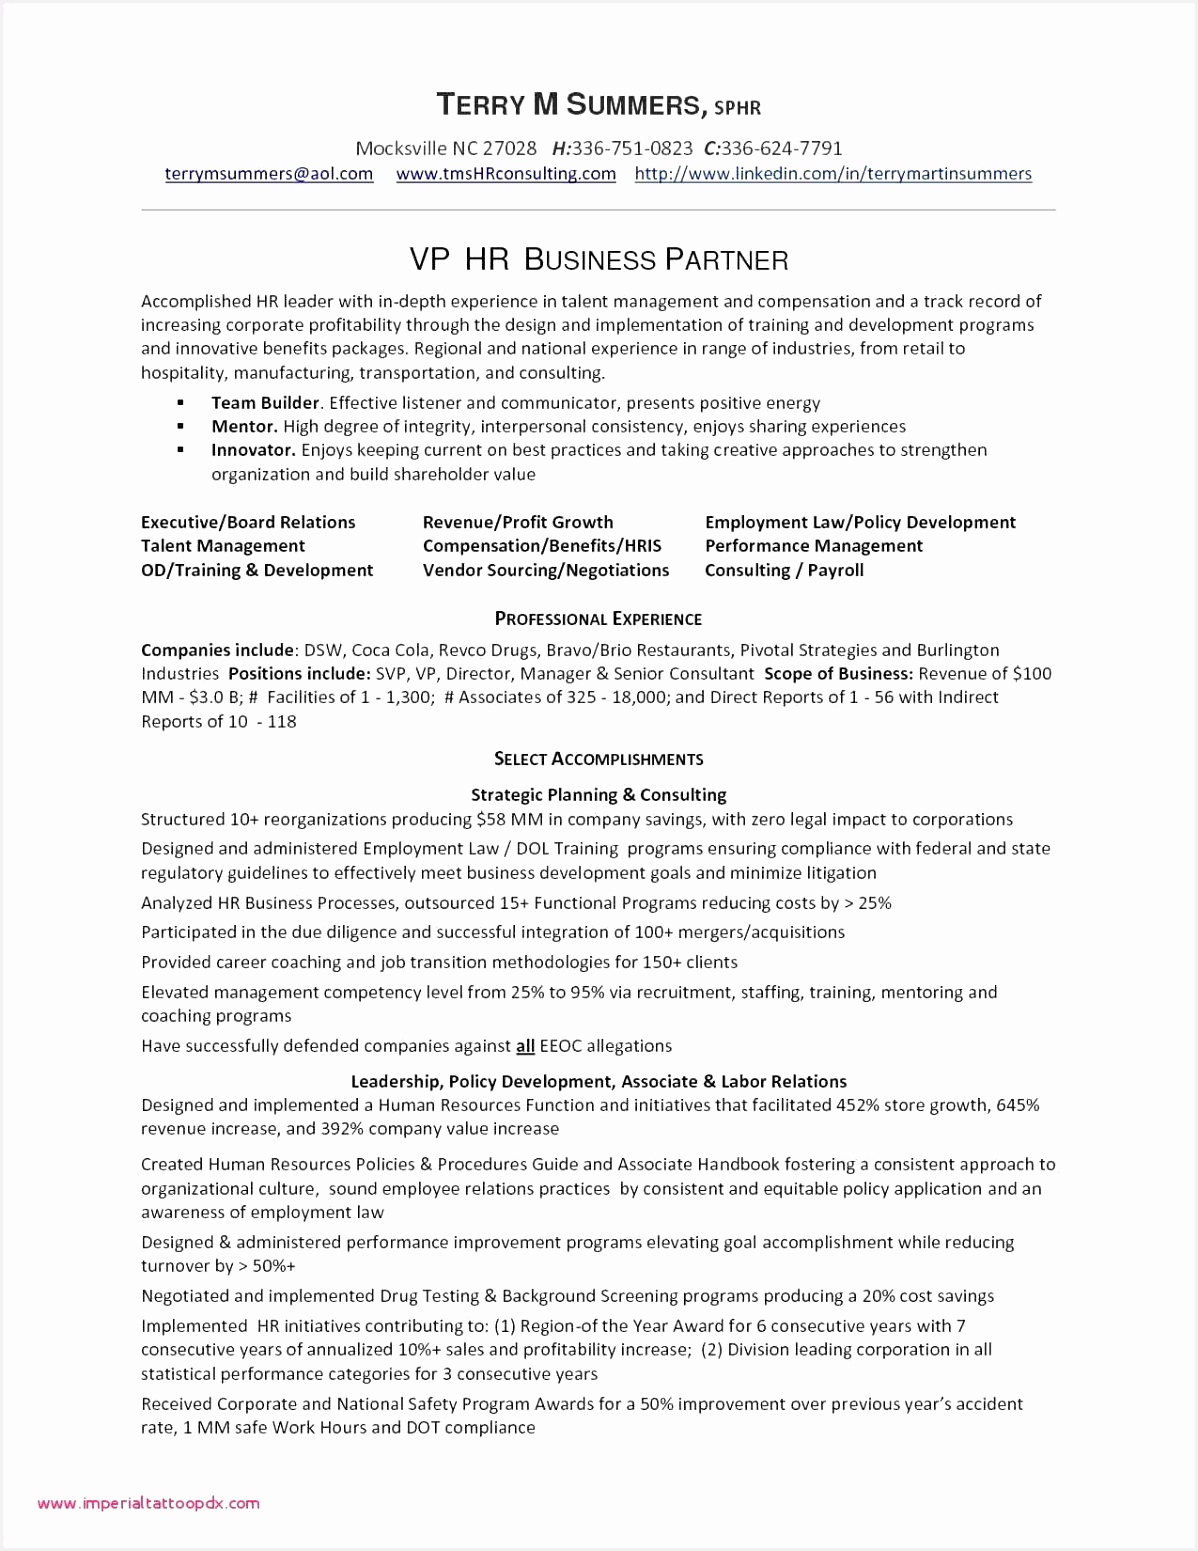 Network Administrator Experience Resume Sample System Administrator Resume Template Word Beautiful by Law Template 155111981bUje